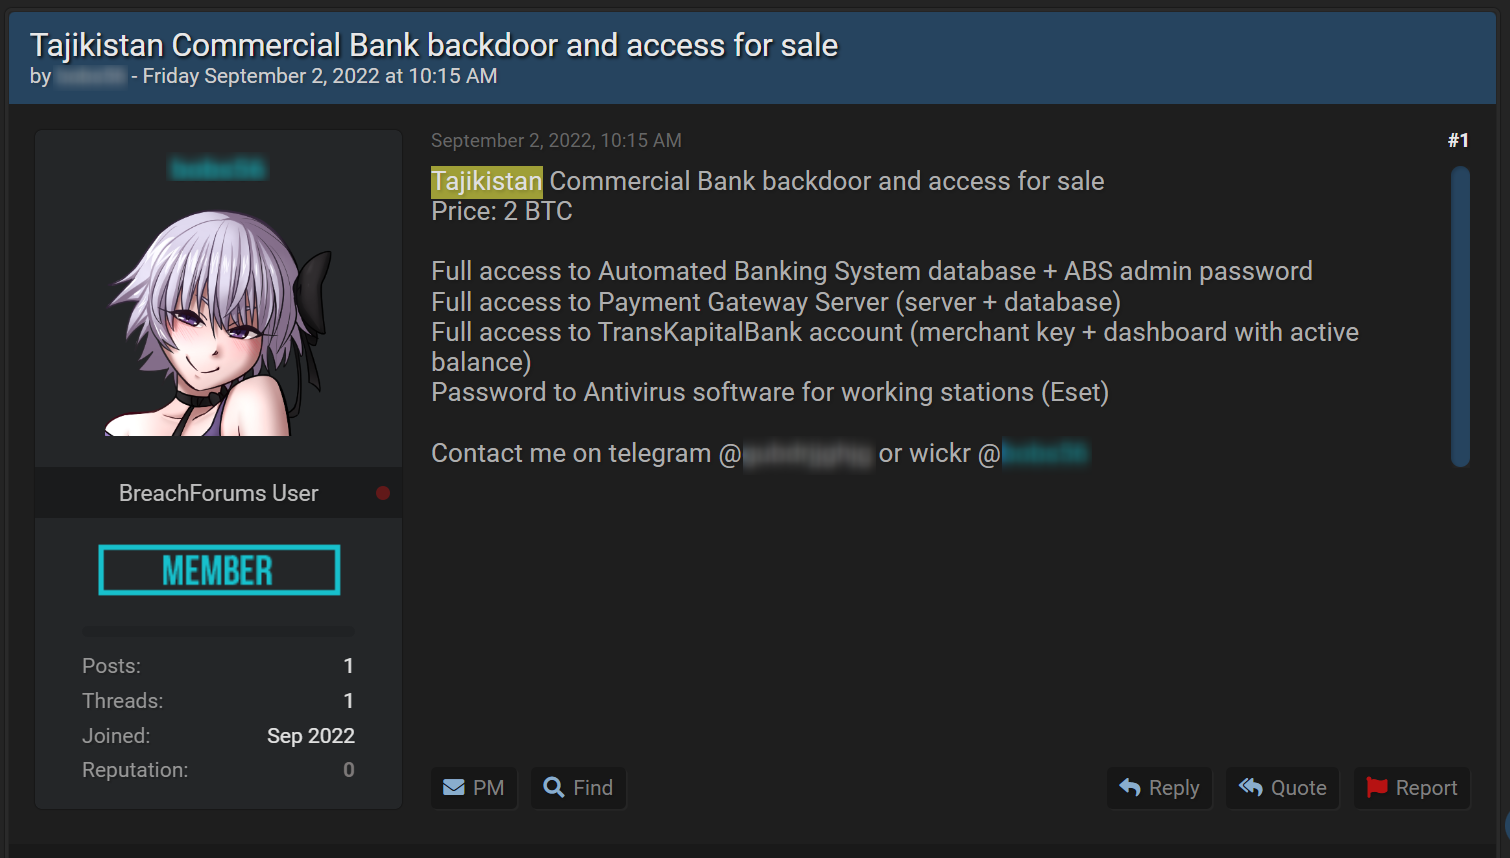 A backdoor to Tajikistan Commercial Bank is offered for sale on a hacking forum.